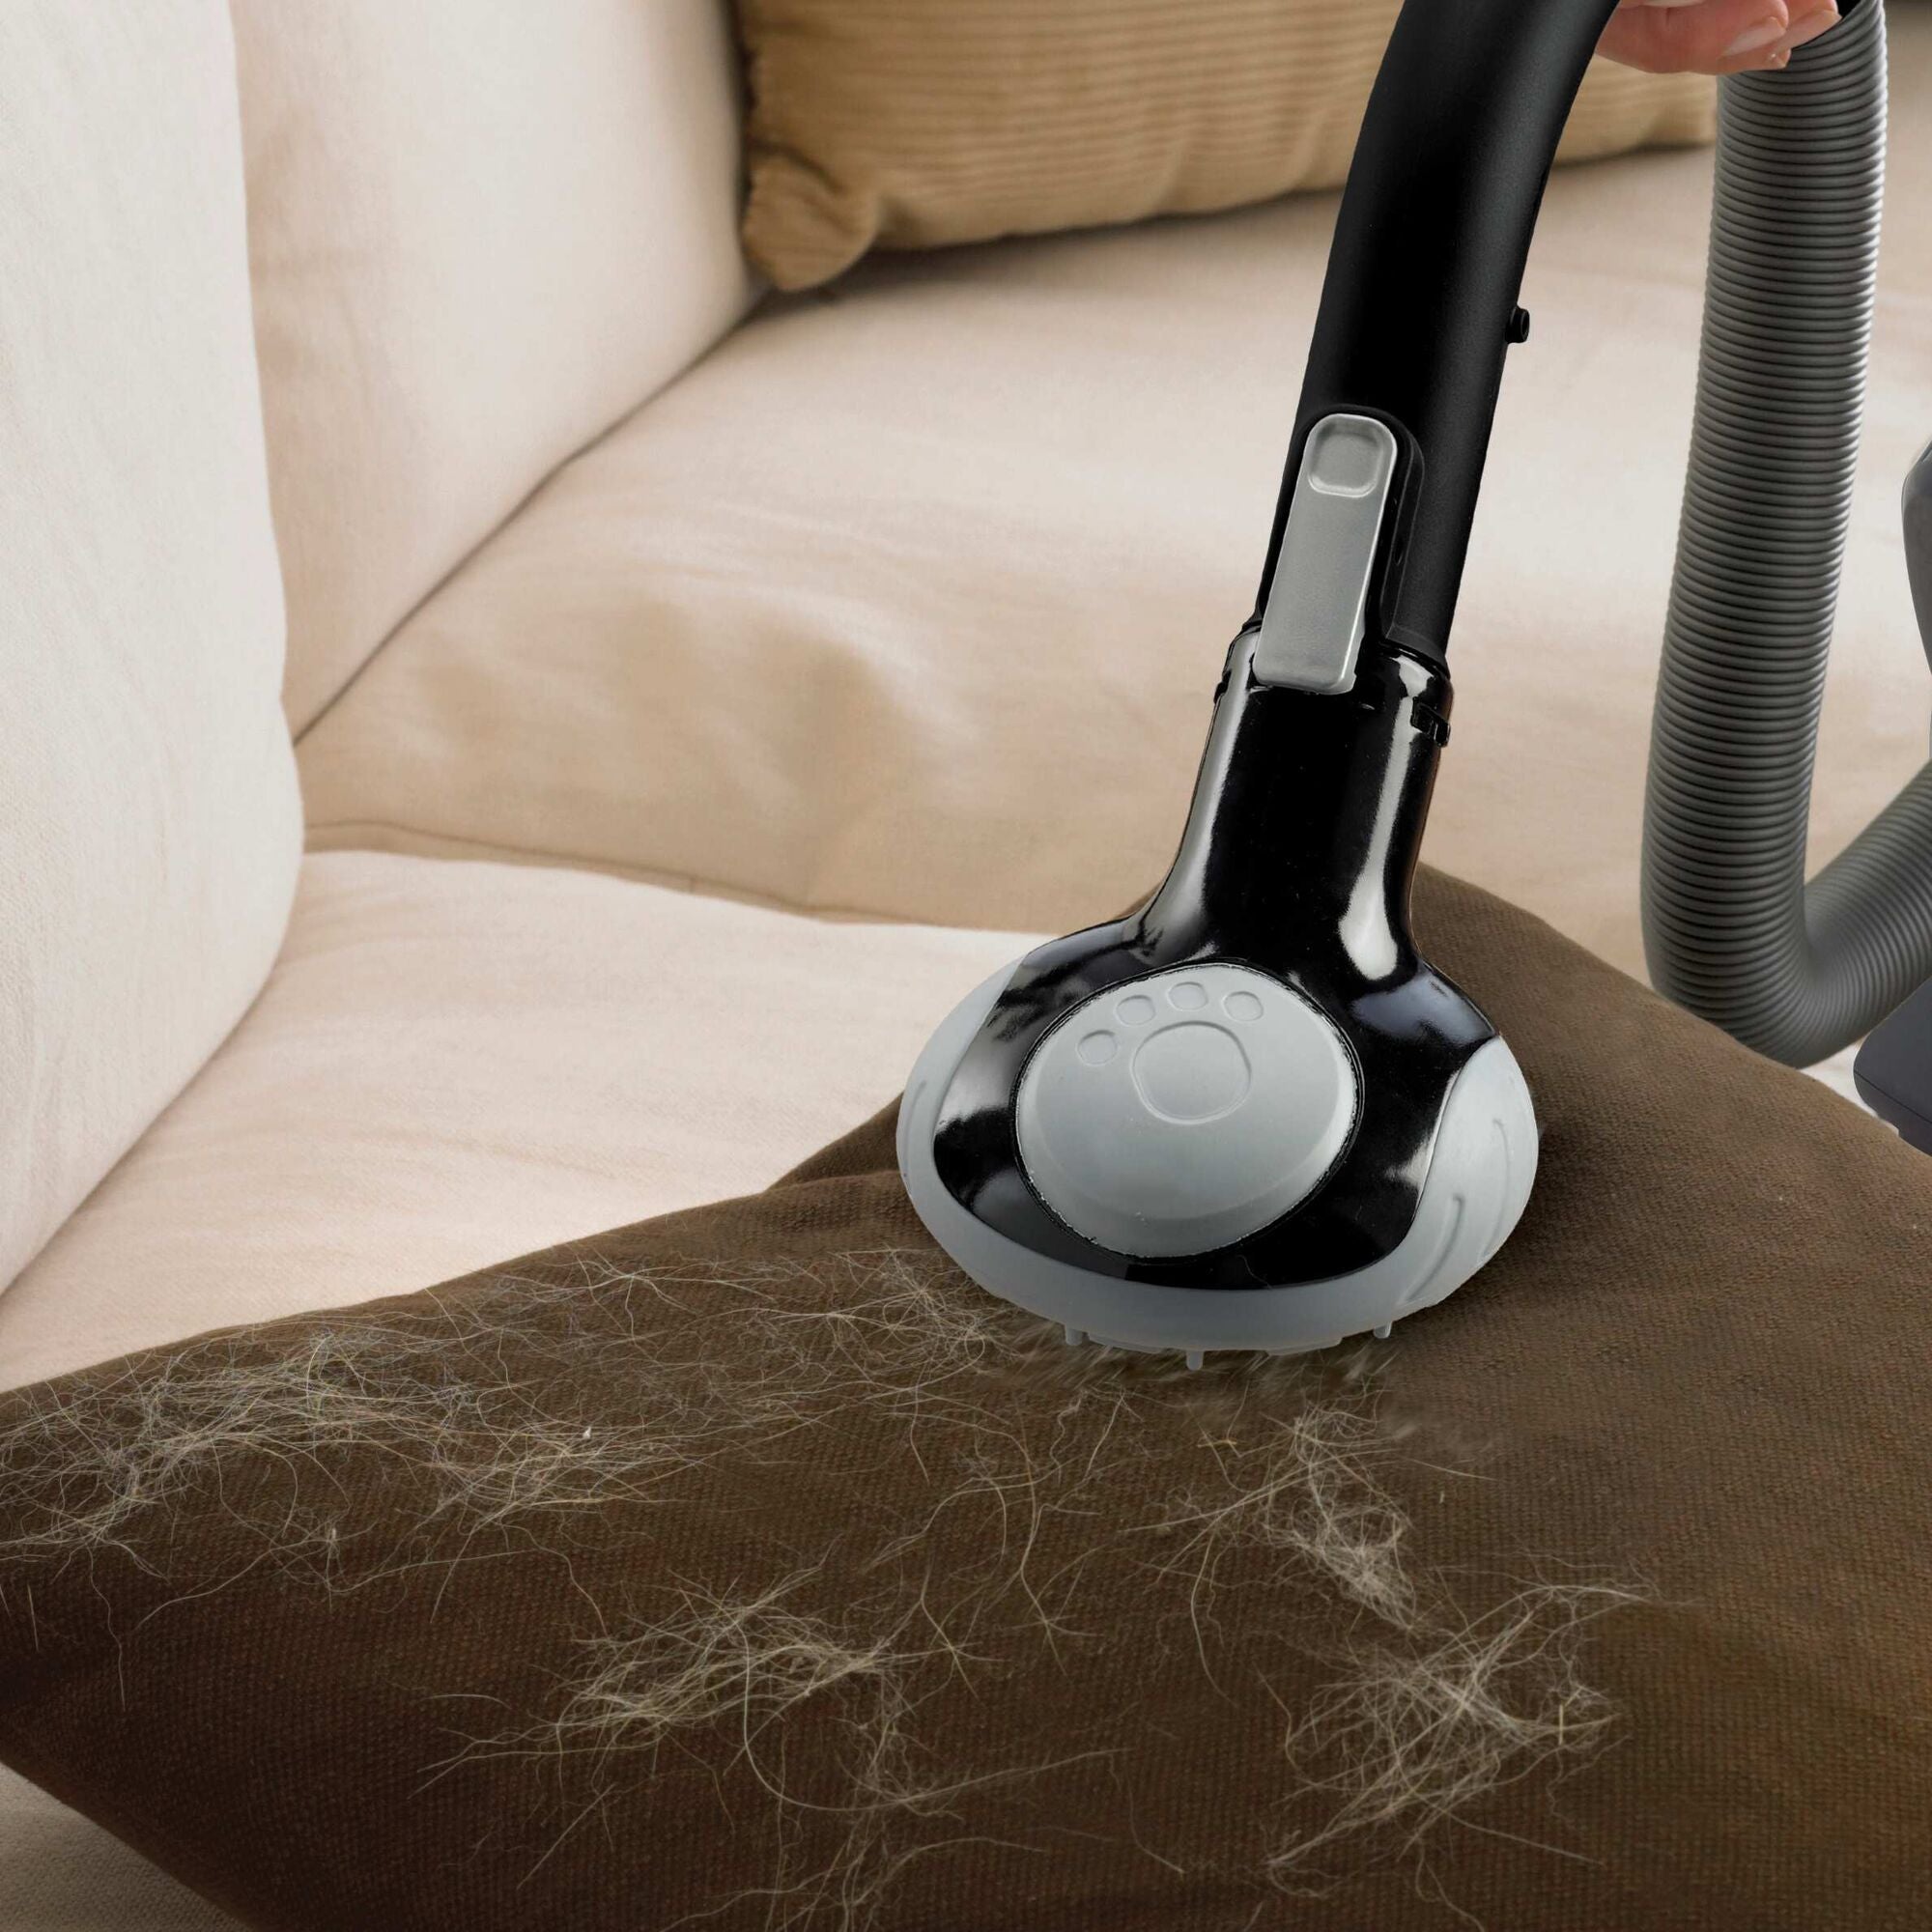 An overview of the BLACK+DECKER dustbuster® 20V MAX* Flex Handheld Vacuum With Pet Hair Brush with accessories.